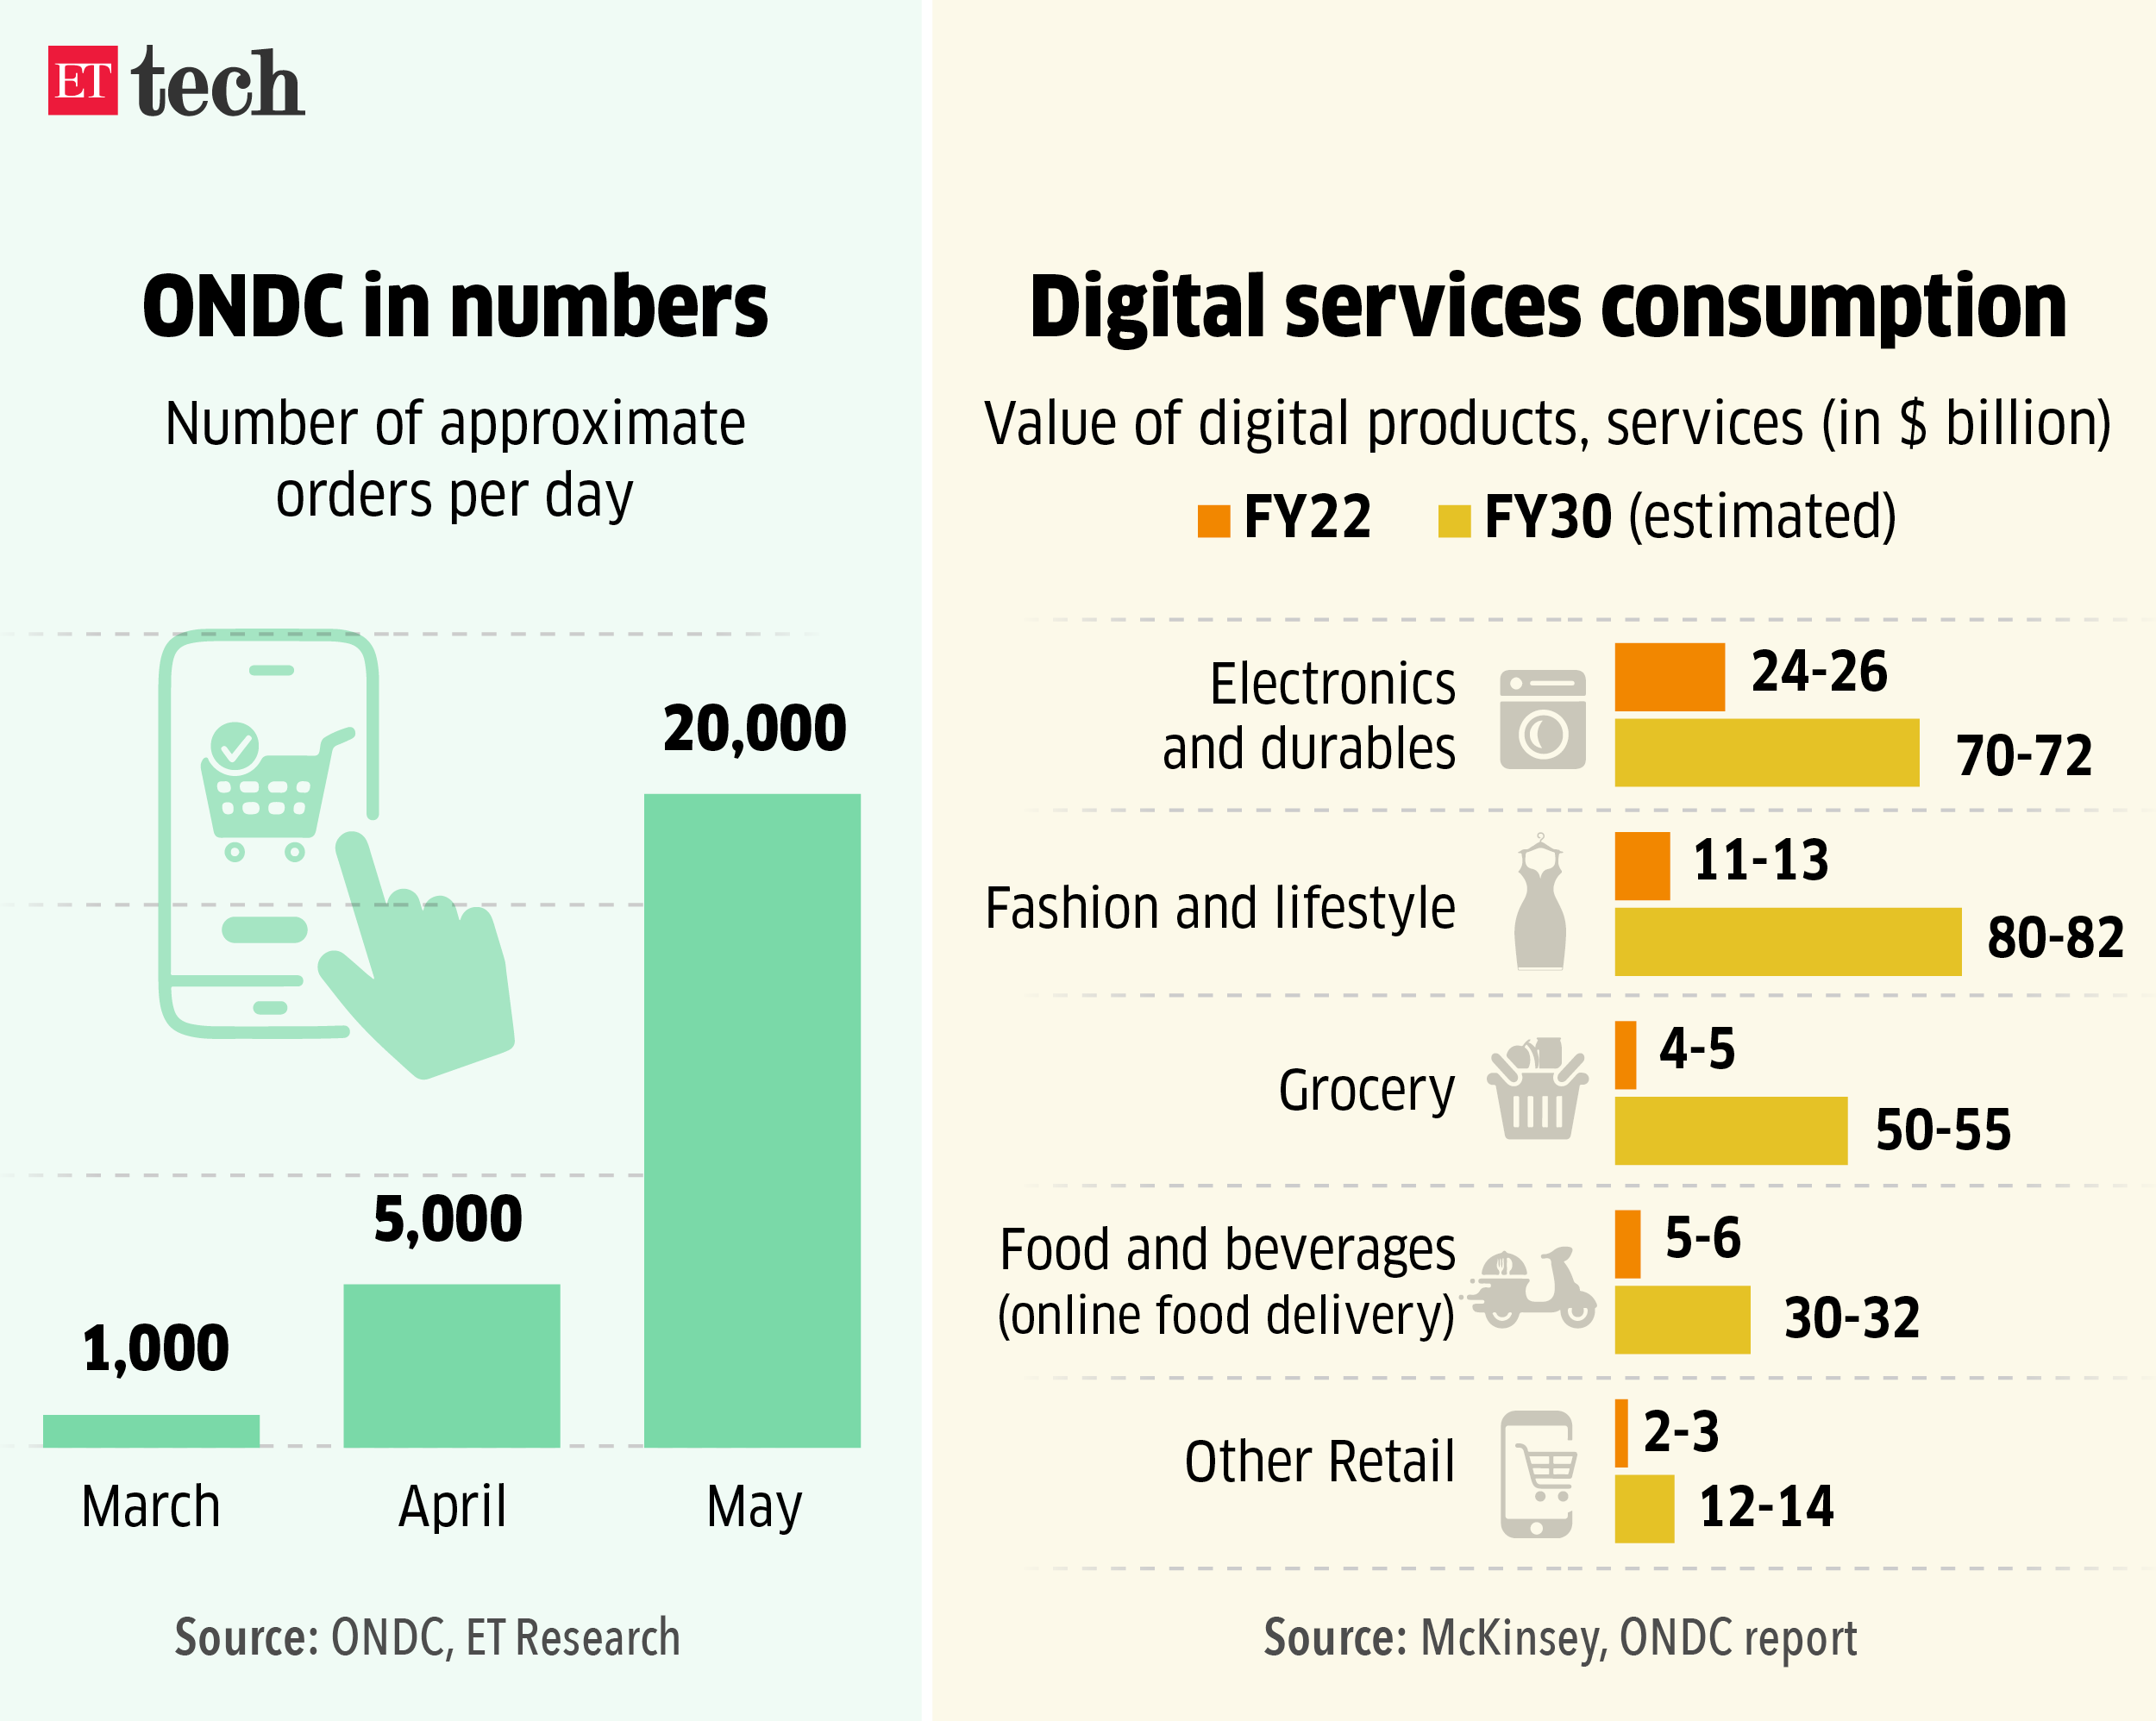 ONDC in numbers_Graphic_ETTECH